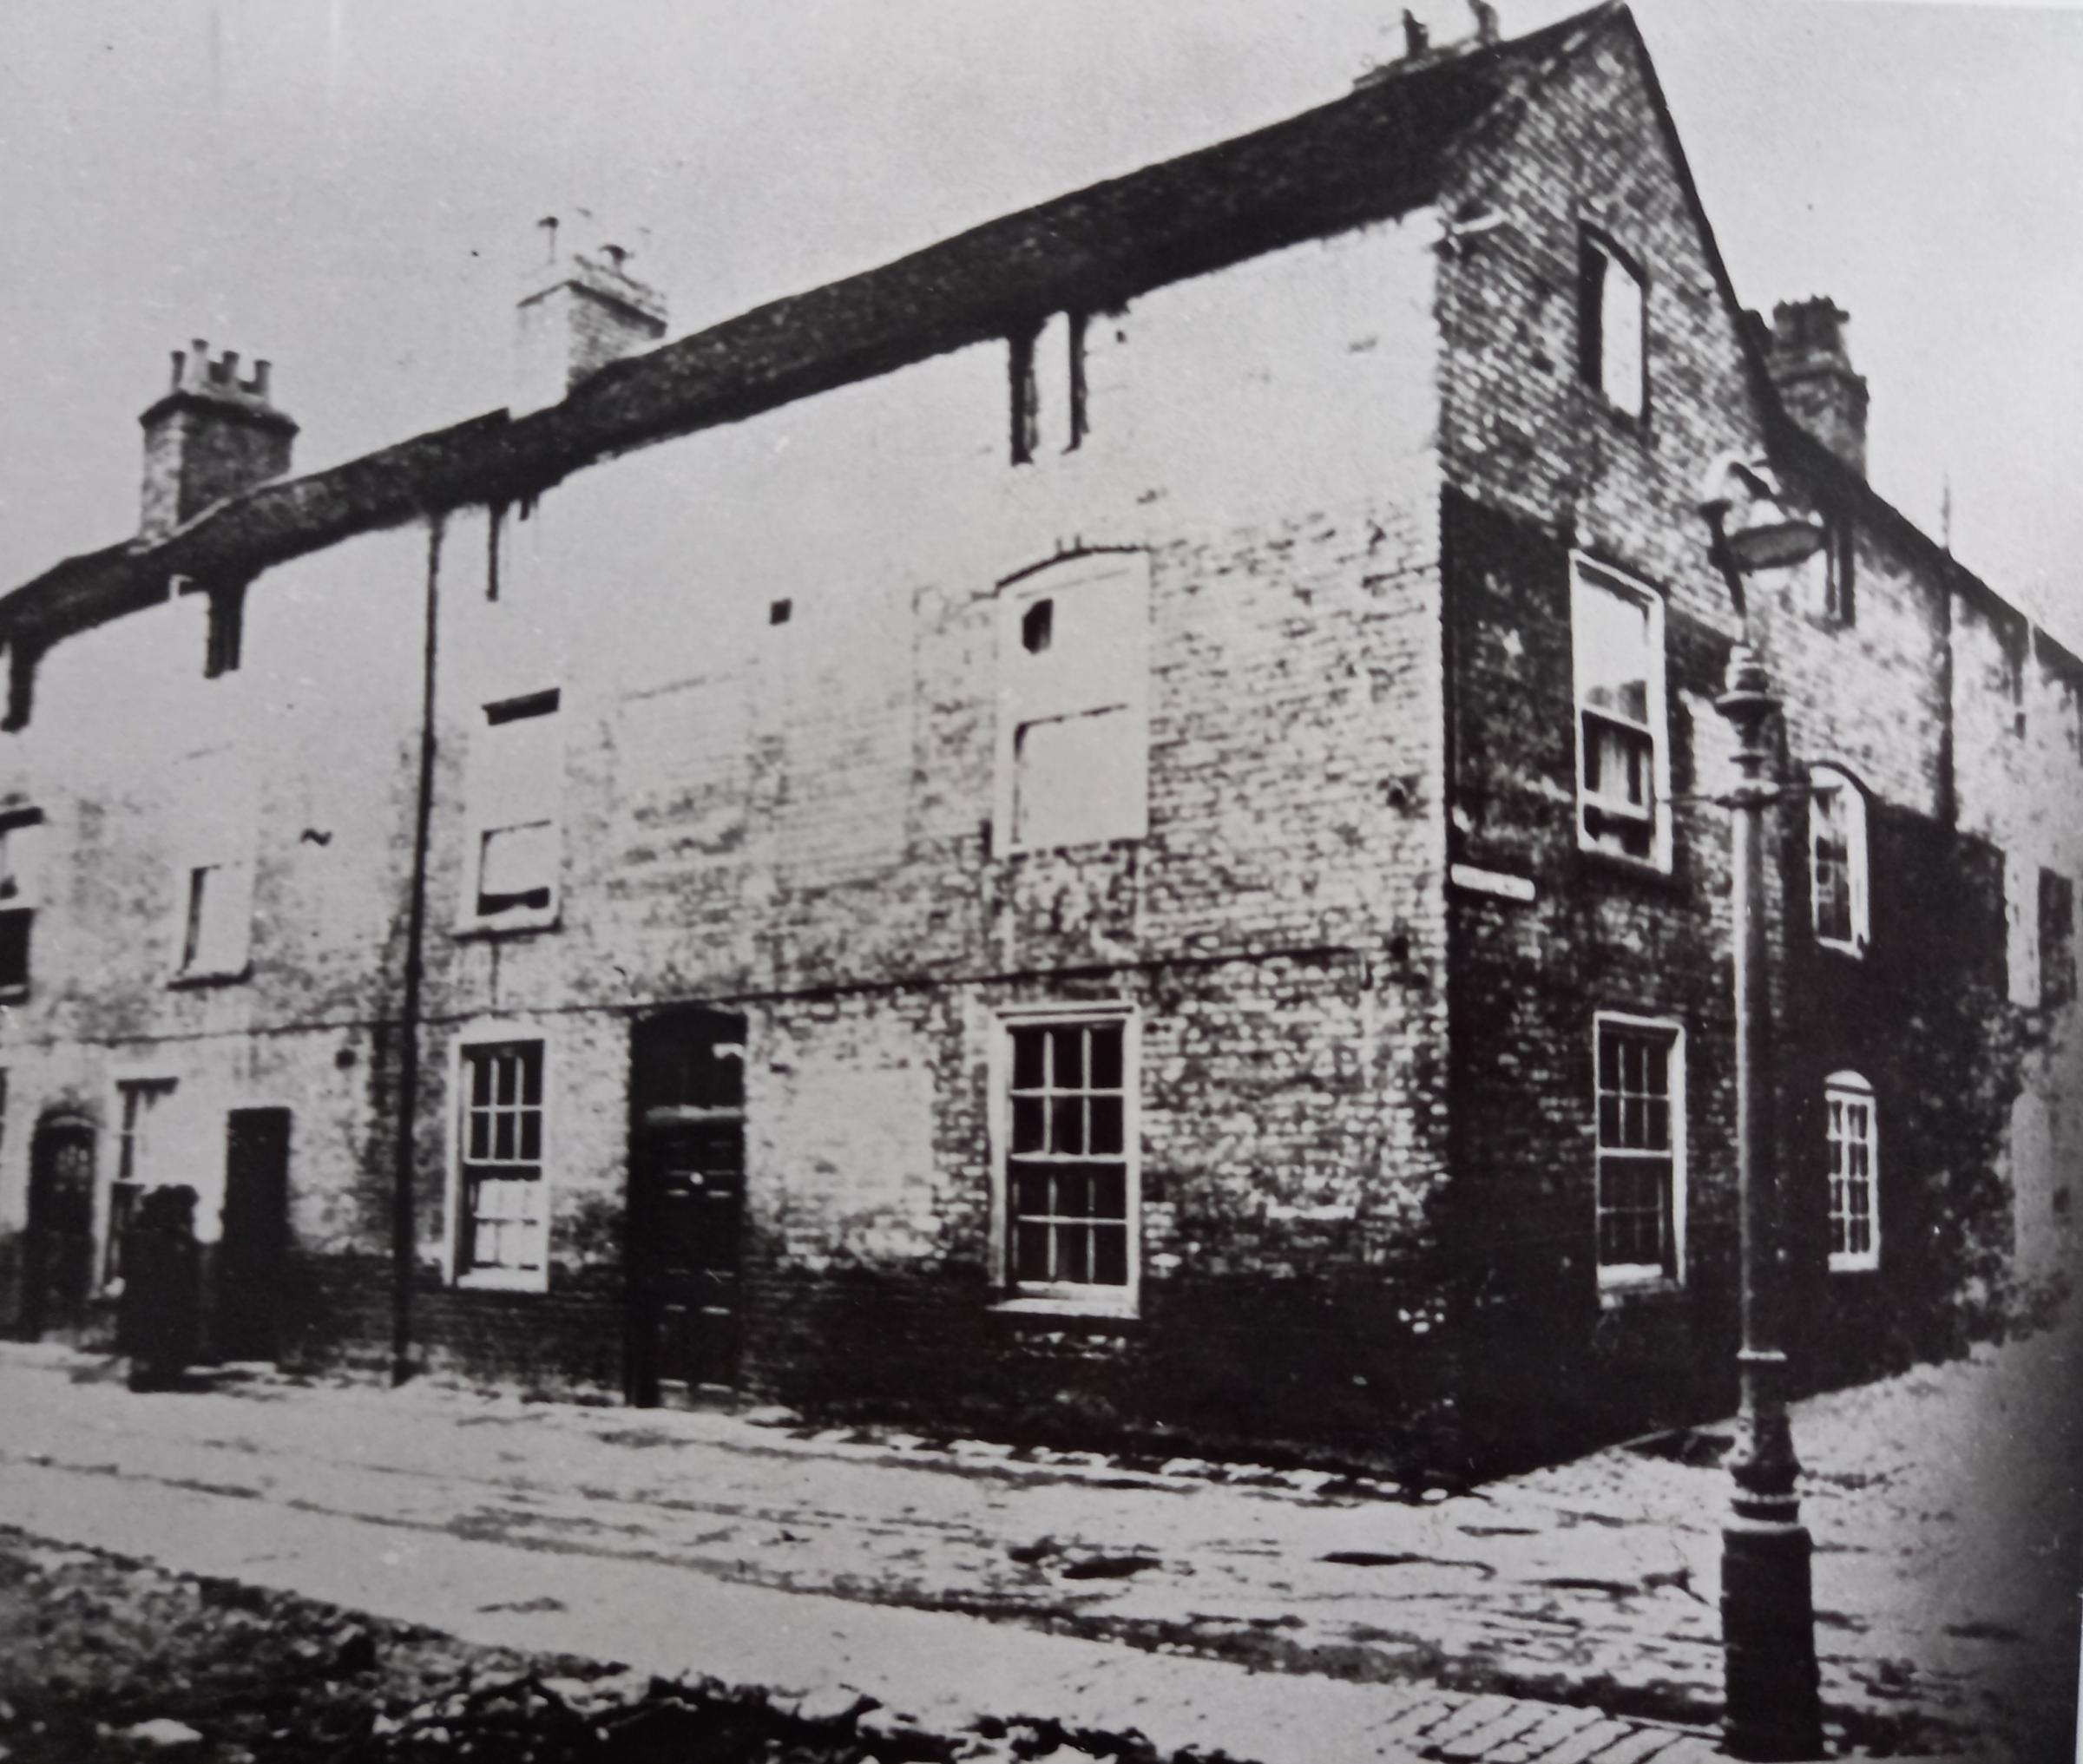 The old Bull and Sun pub in Bull Entry in 1937